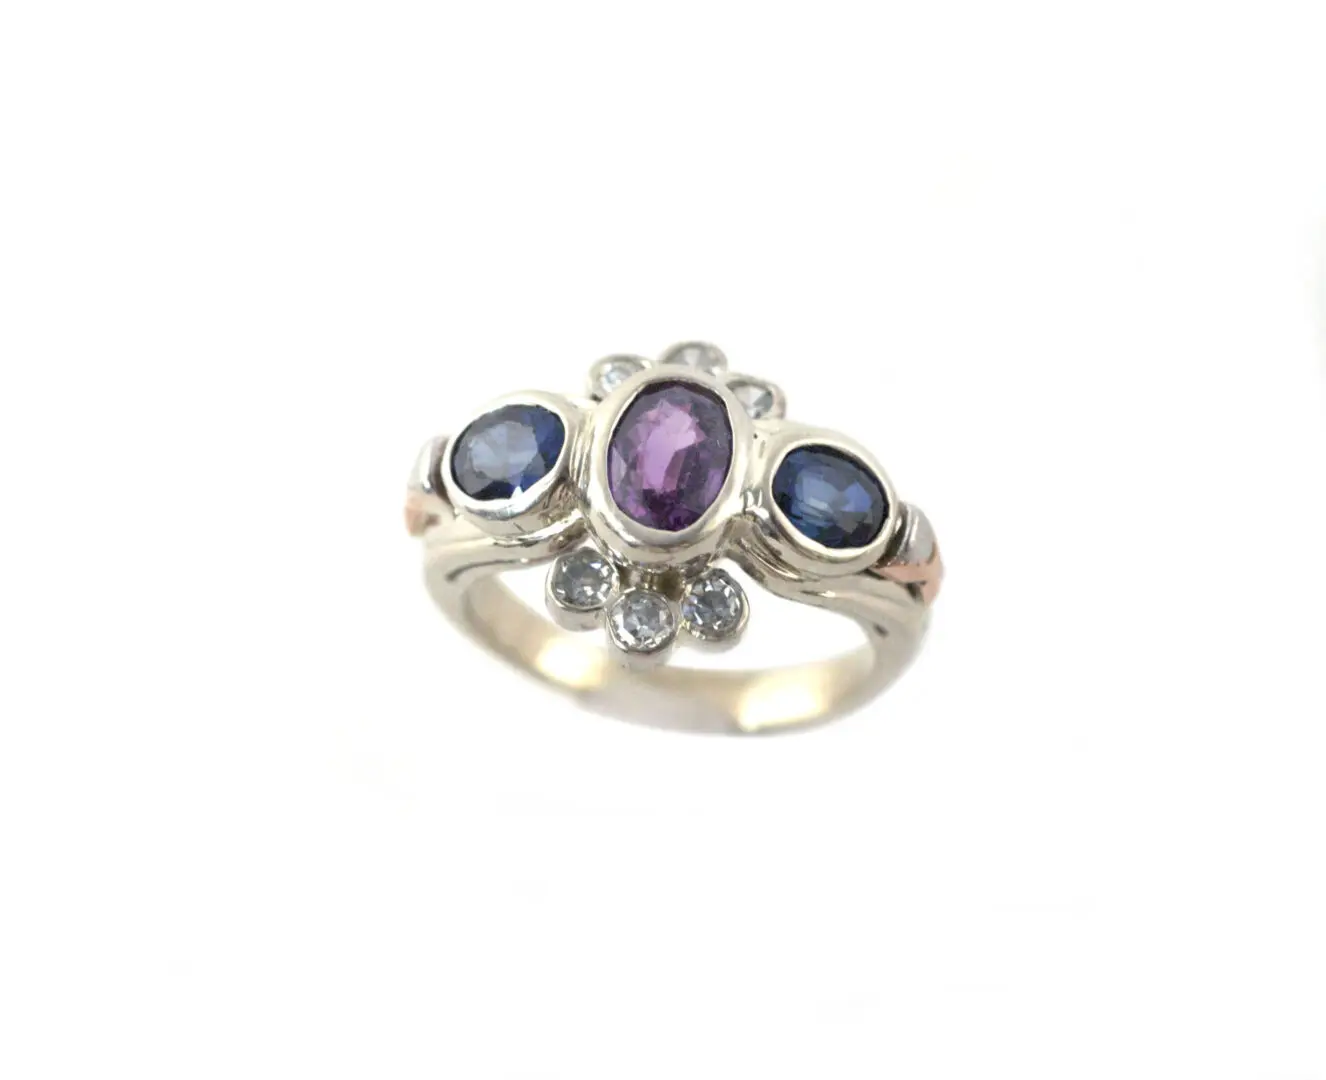 A silver ring with three stones on it.